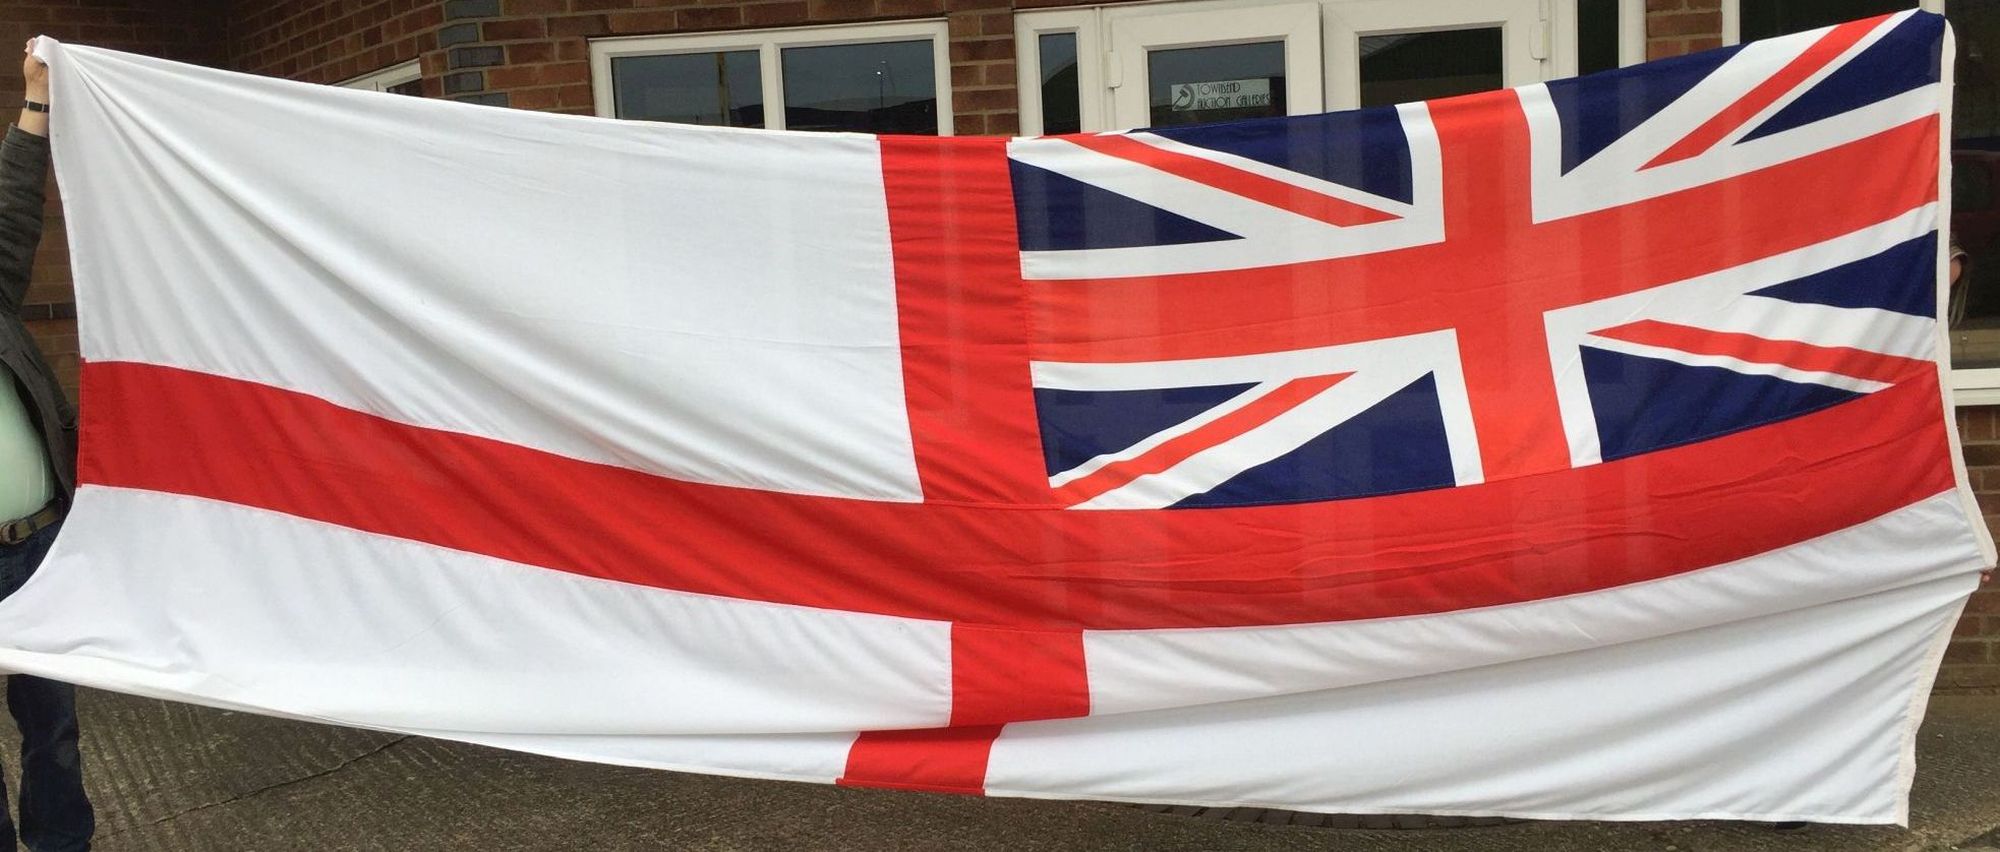 A large white ensign flag from the decommissioned aircraft carrier HMS Invincible (scrapped 2010).